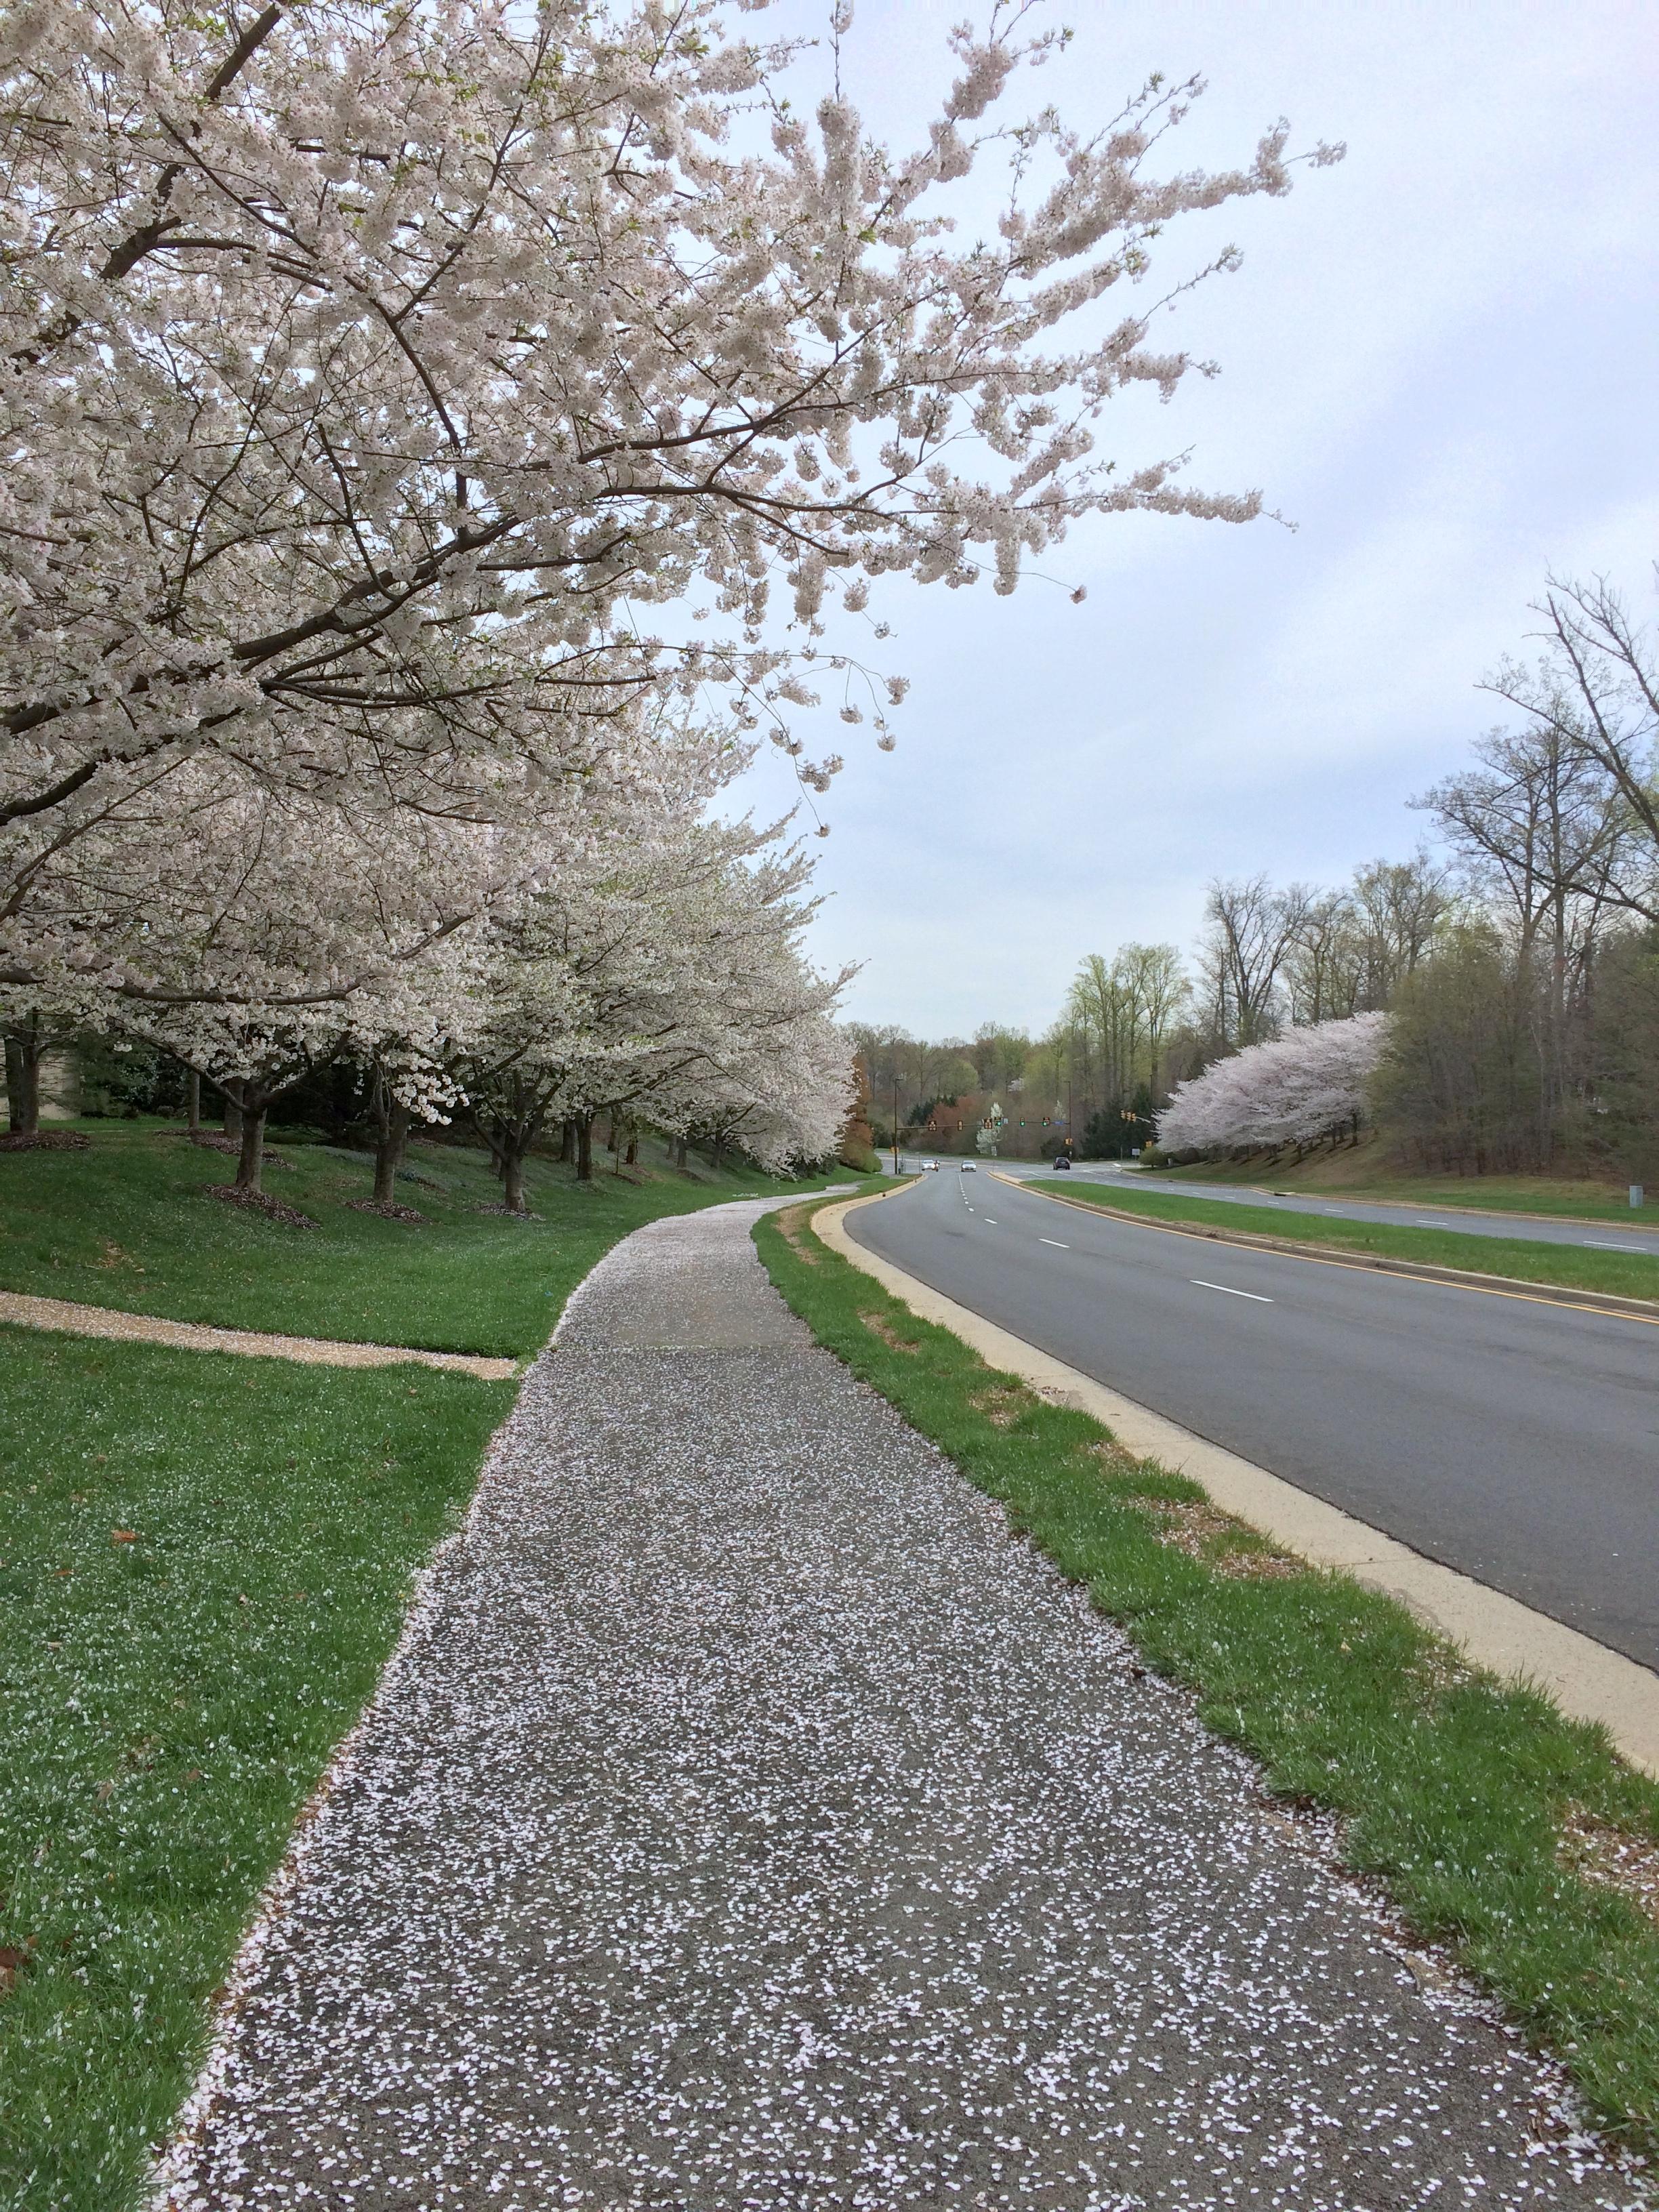 Reston Association does a great job of maintaining the common ground in Reston. These Cherry Trees are beautiful at this time of year!